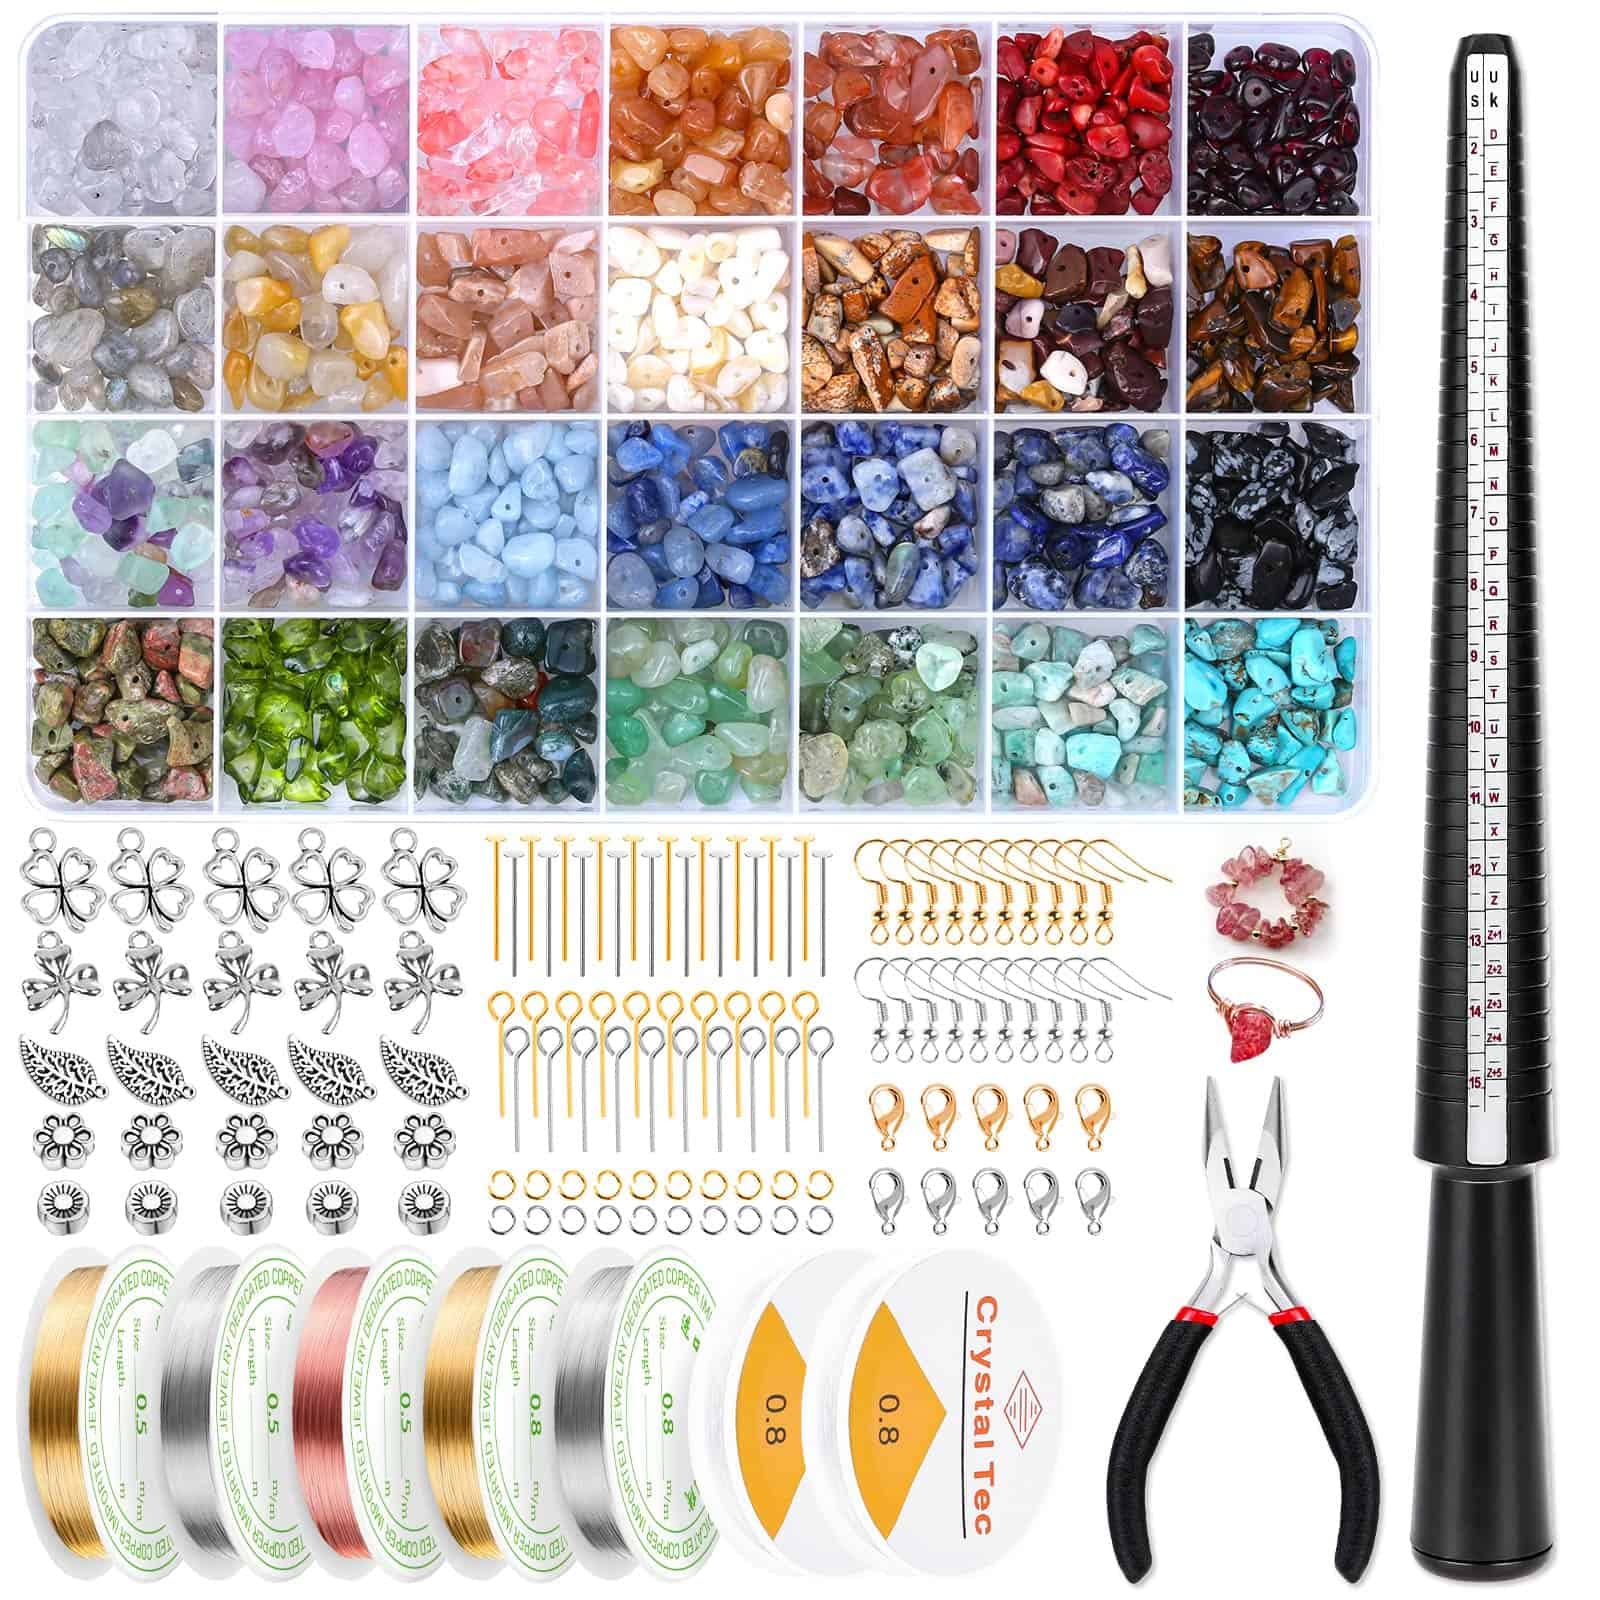 Compatible Withring Size Measuring Tools With Jewelry Wire And Crystal  Stone Beads